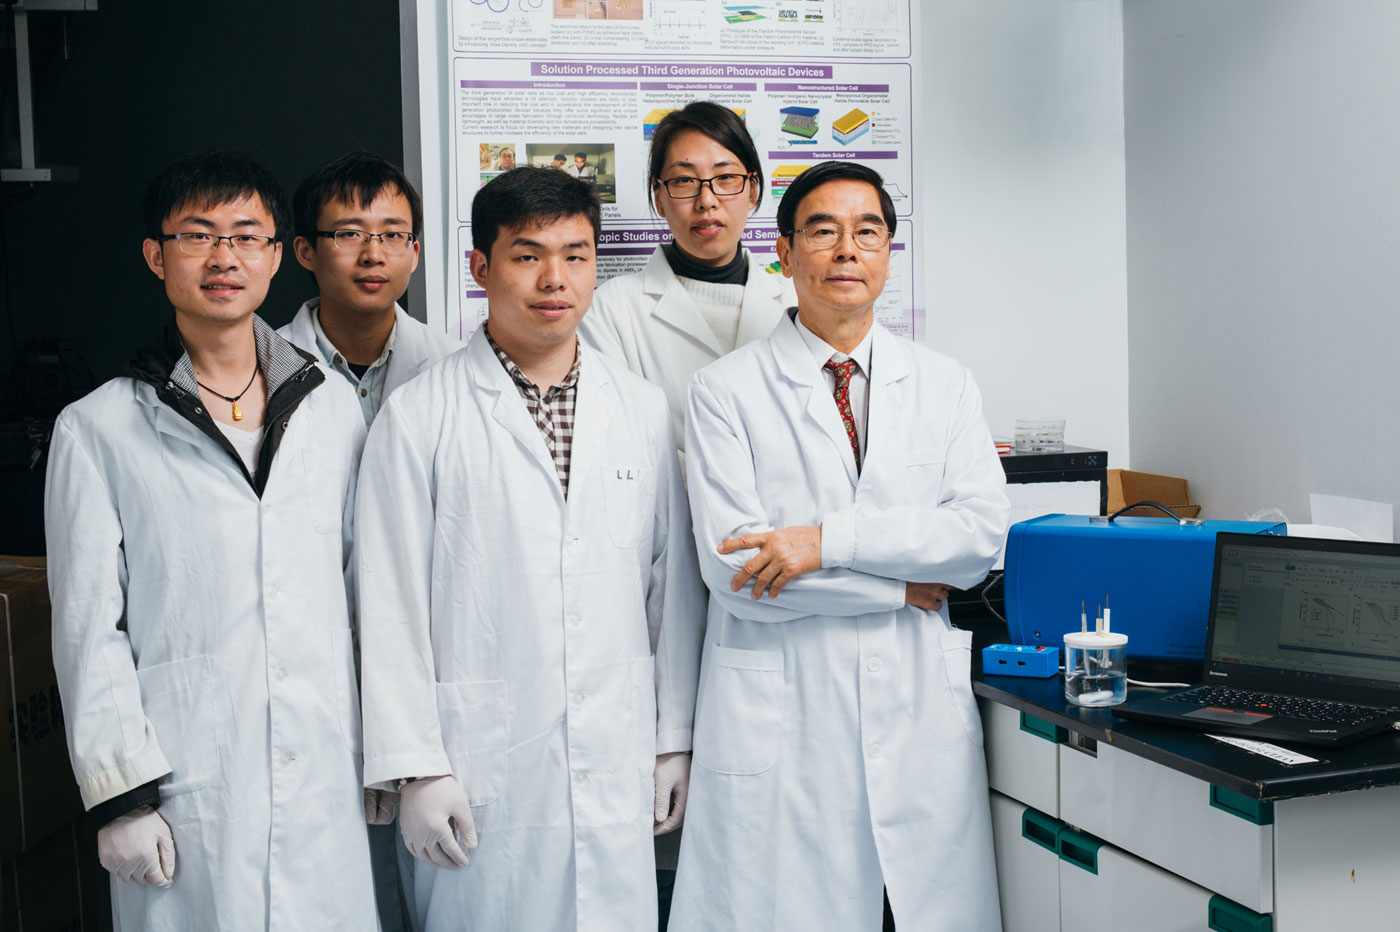 Professor Wong with his research students